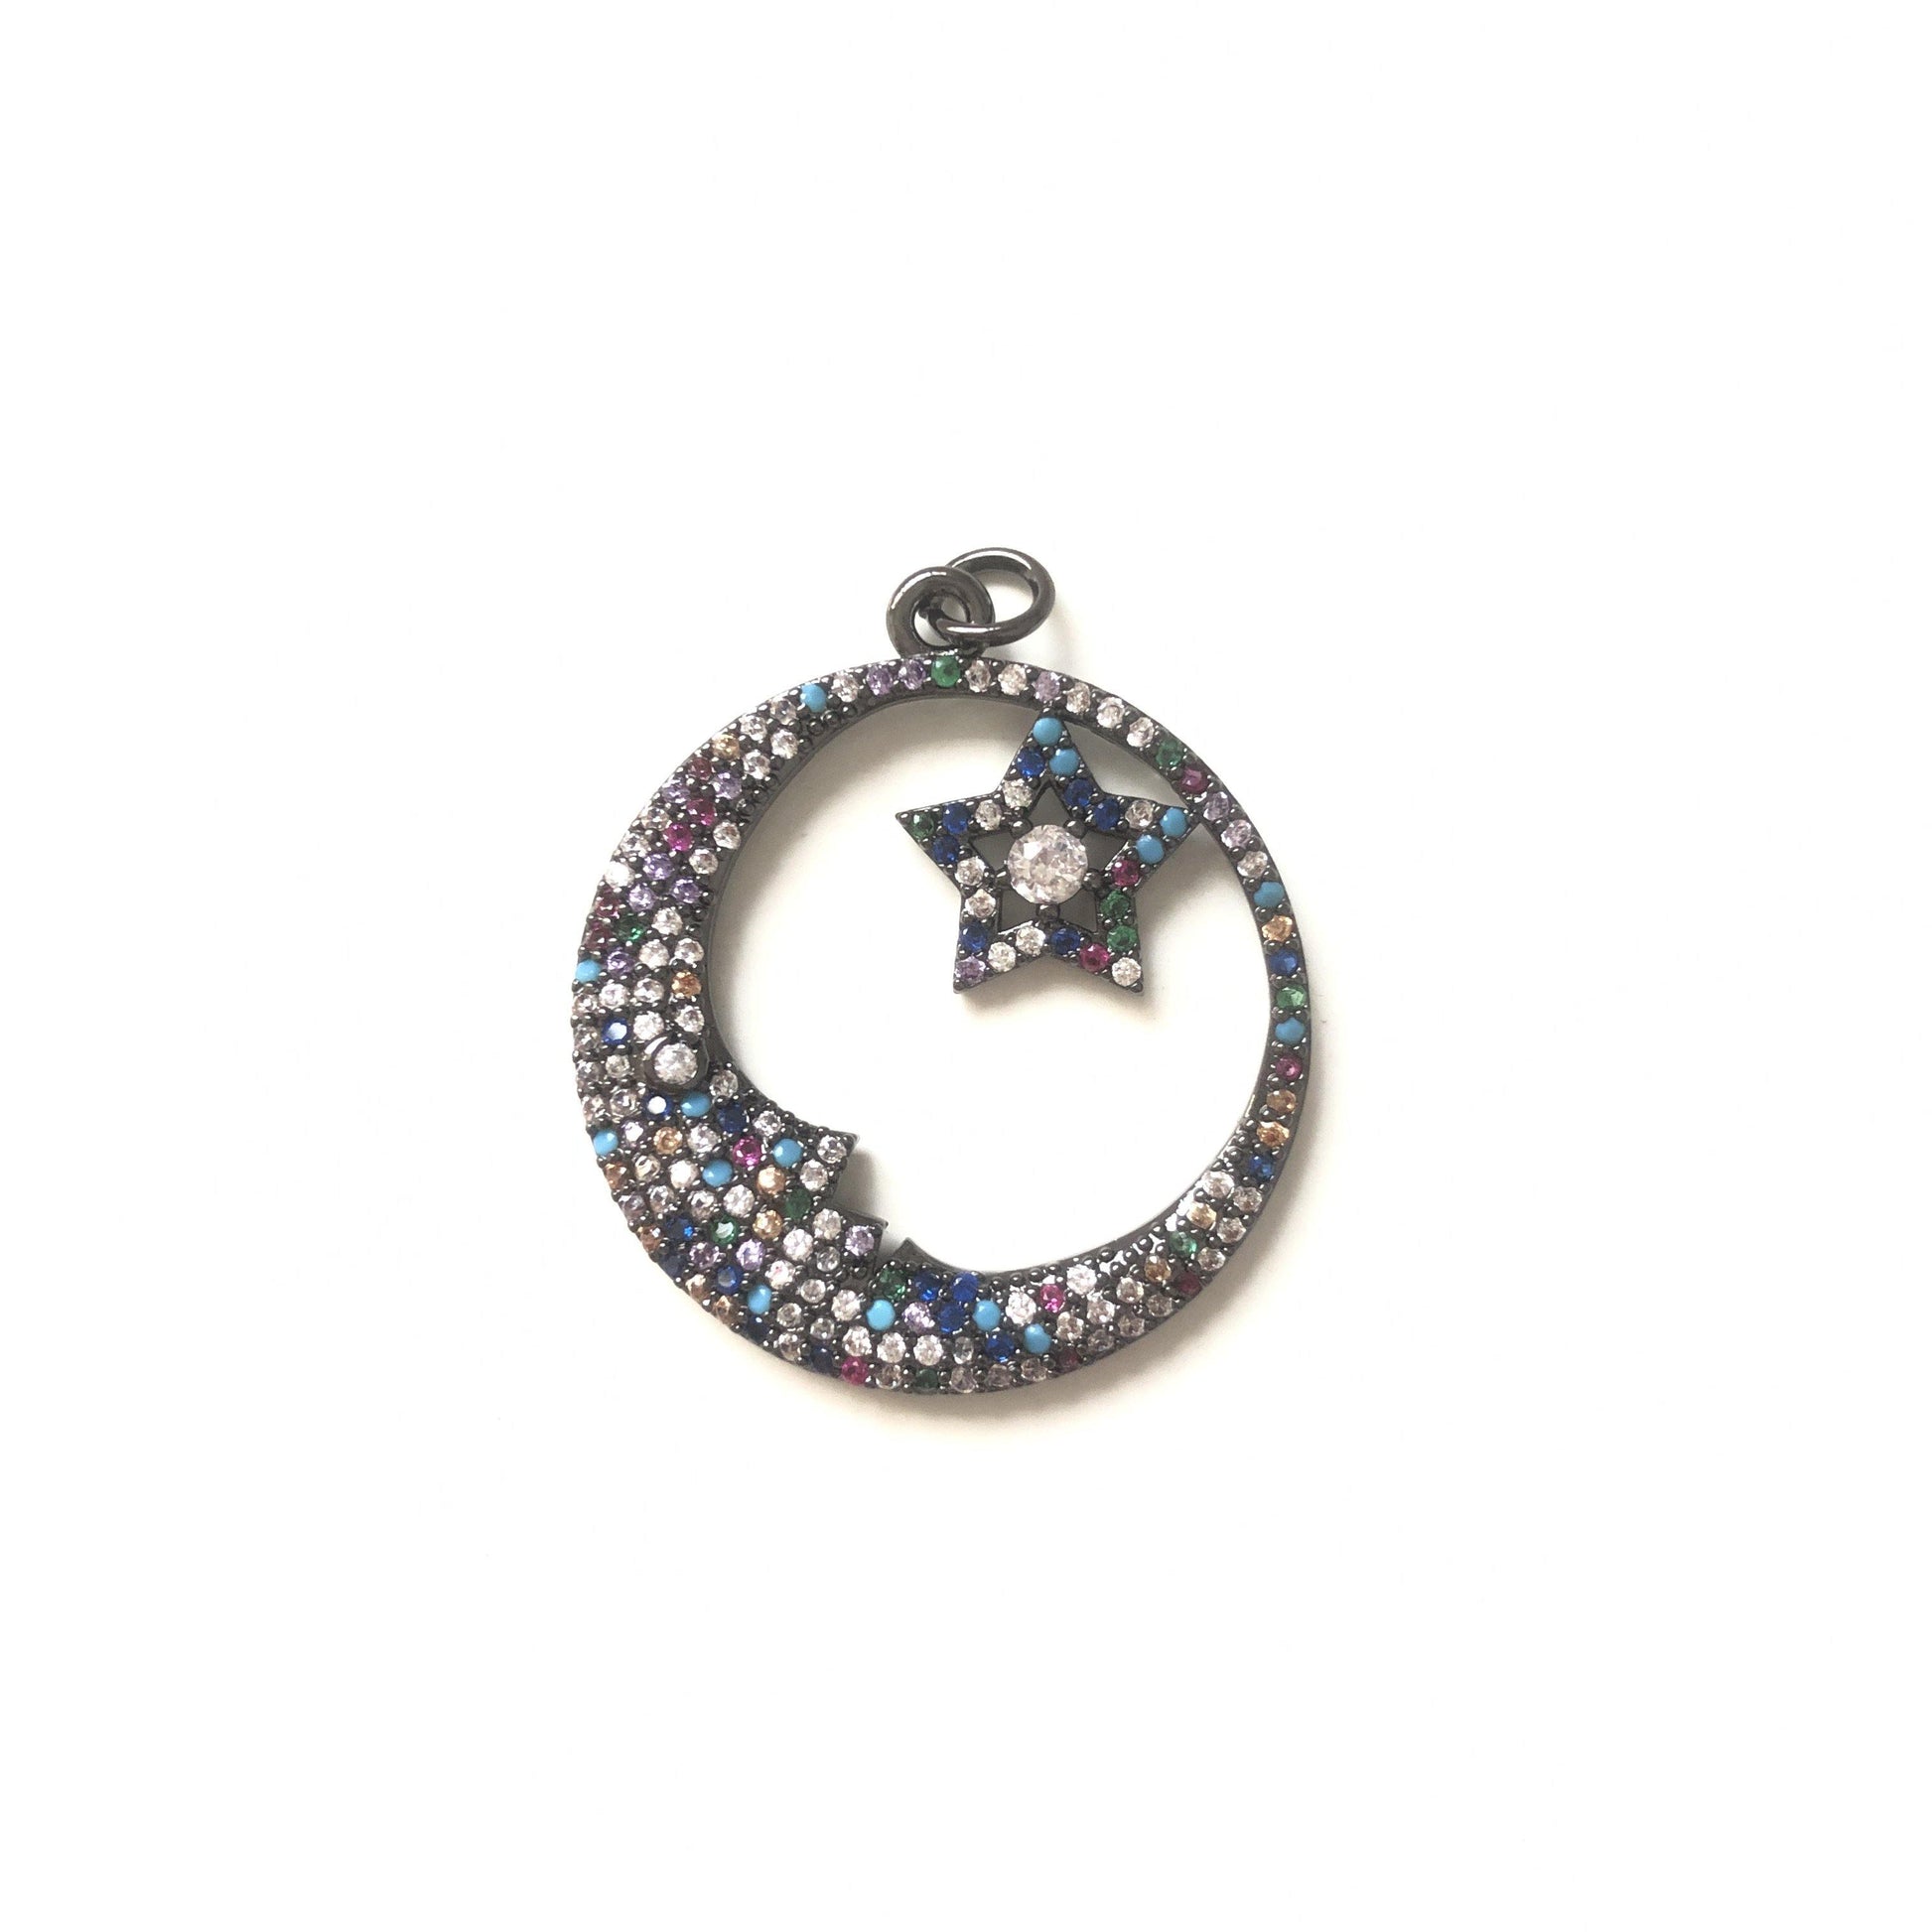 5pcs/lot 27mm Multicolor CZ Paved Moon & Star Charms Black CZ Paved Charms Colorful Zirconia Large Sizes Sun Moon Stars Charms Beads Beyond